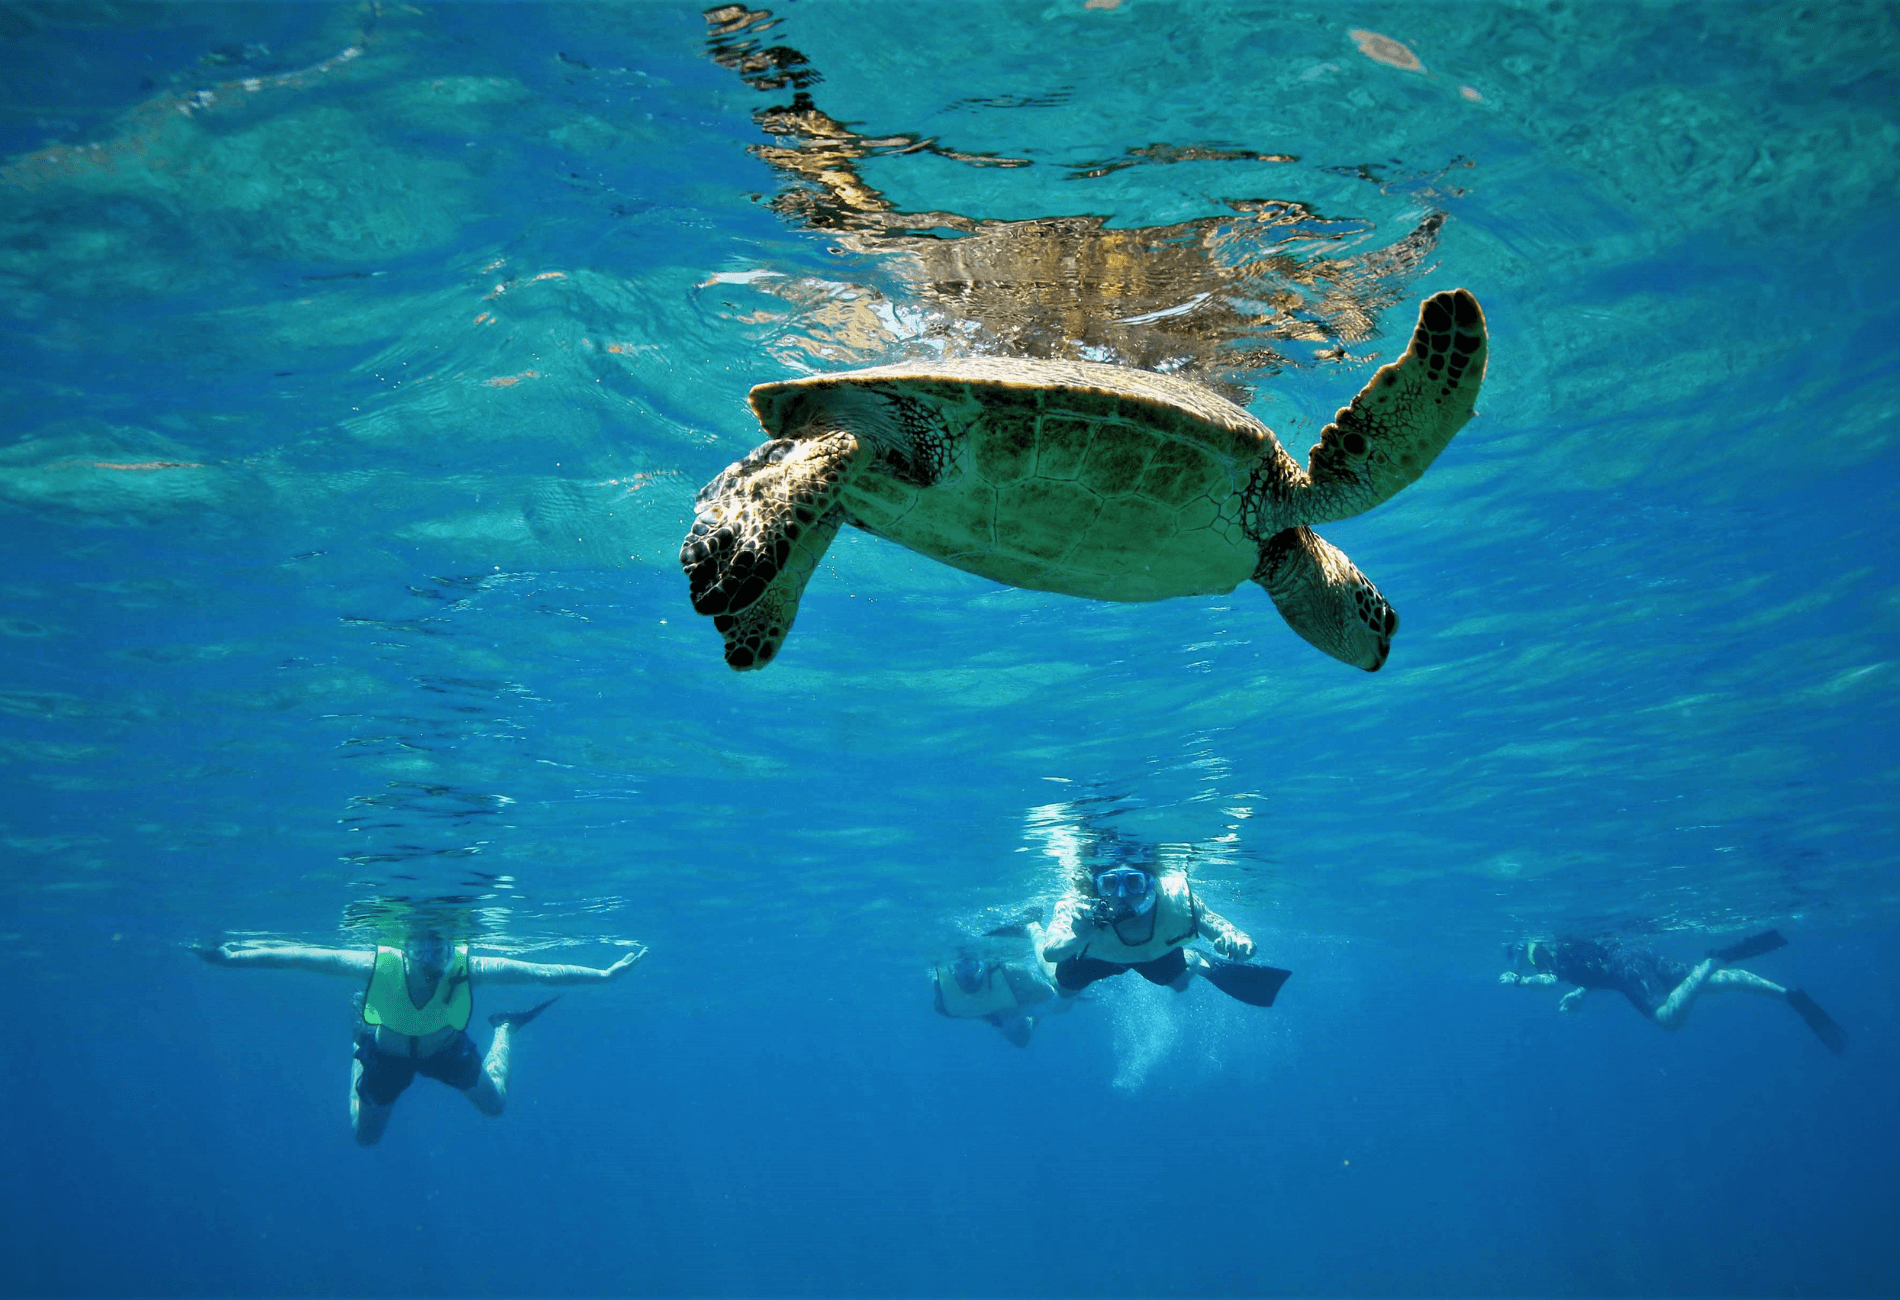 turtles and snorklers in the water in Hawaii, one of the destinations you can save on with Southwest vacation packages